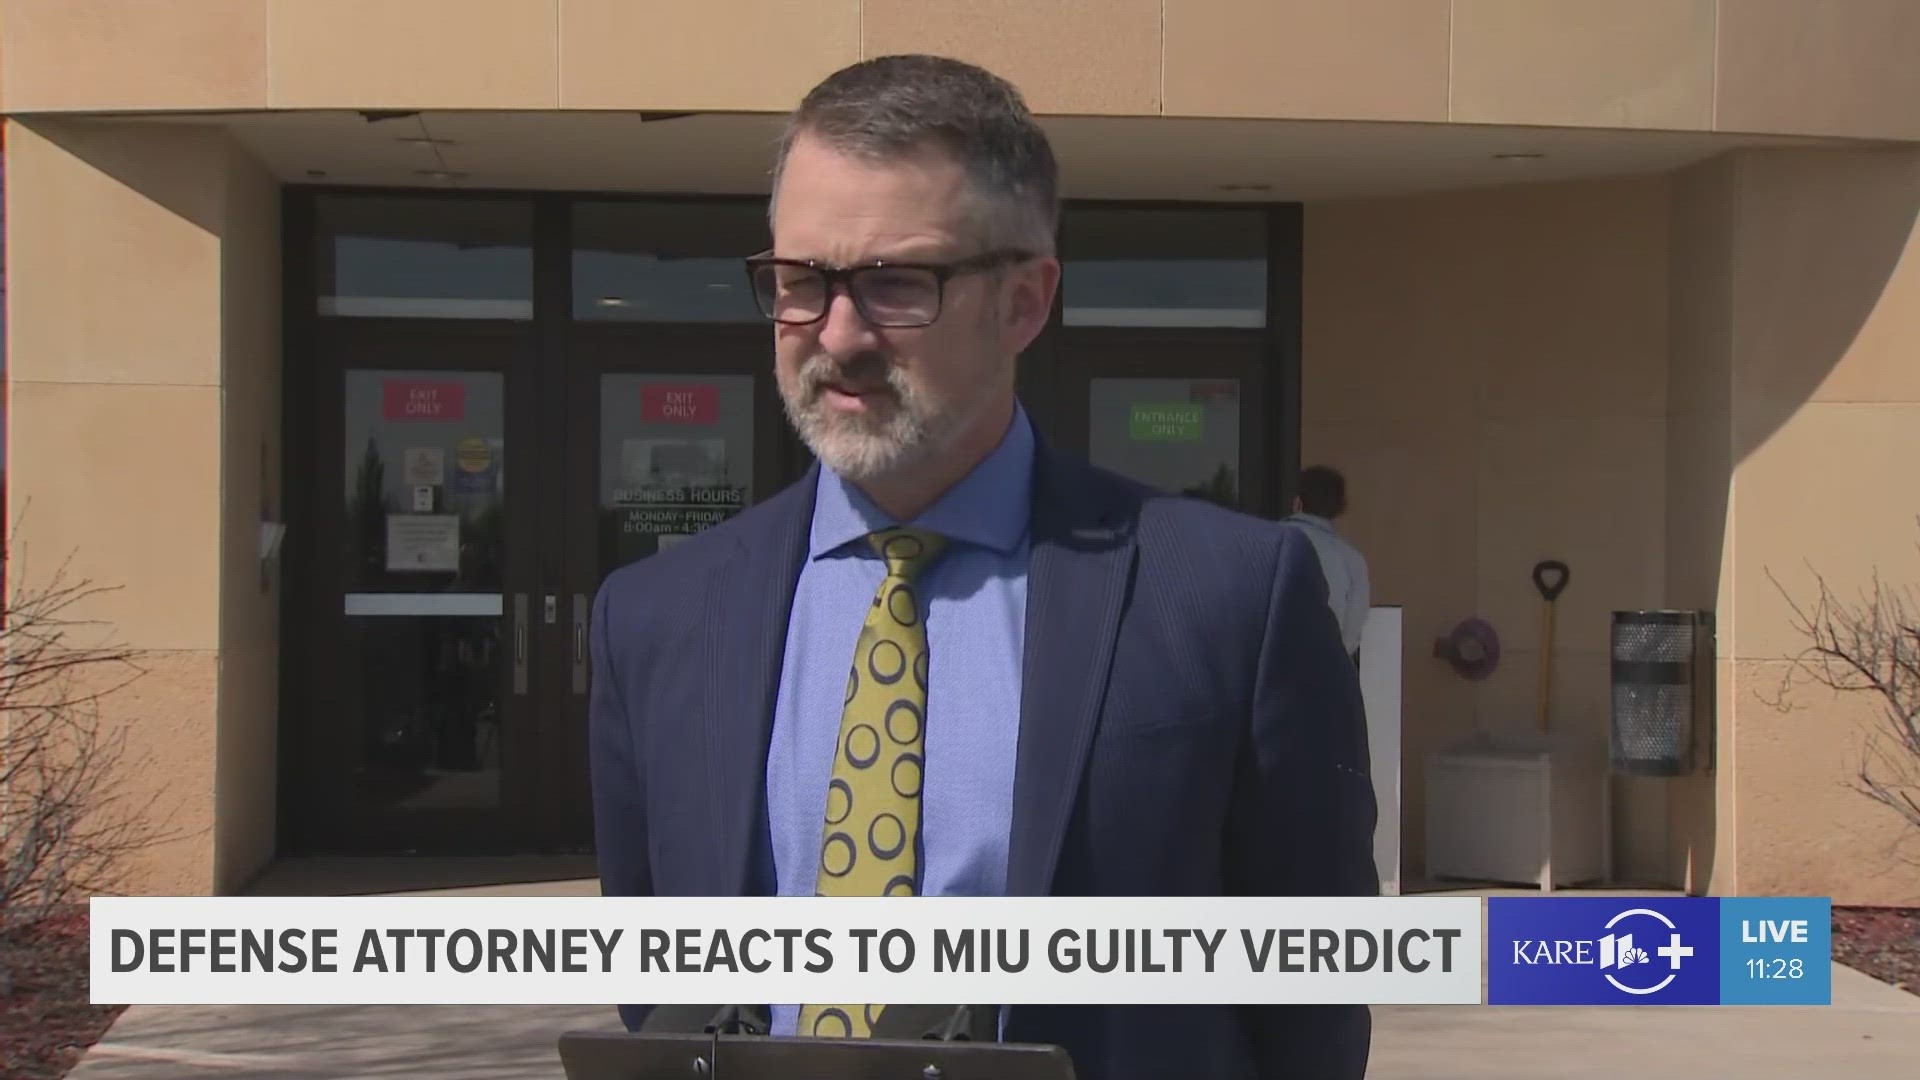 Attorney Aaron Nelson spoke about the guilty verdict of his client, Nicolae Miu, who was convicted of reckless homicide in last year's deadly Apple River stabbing.